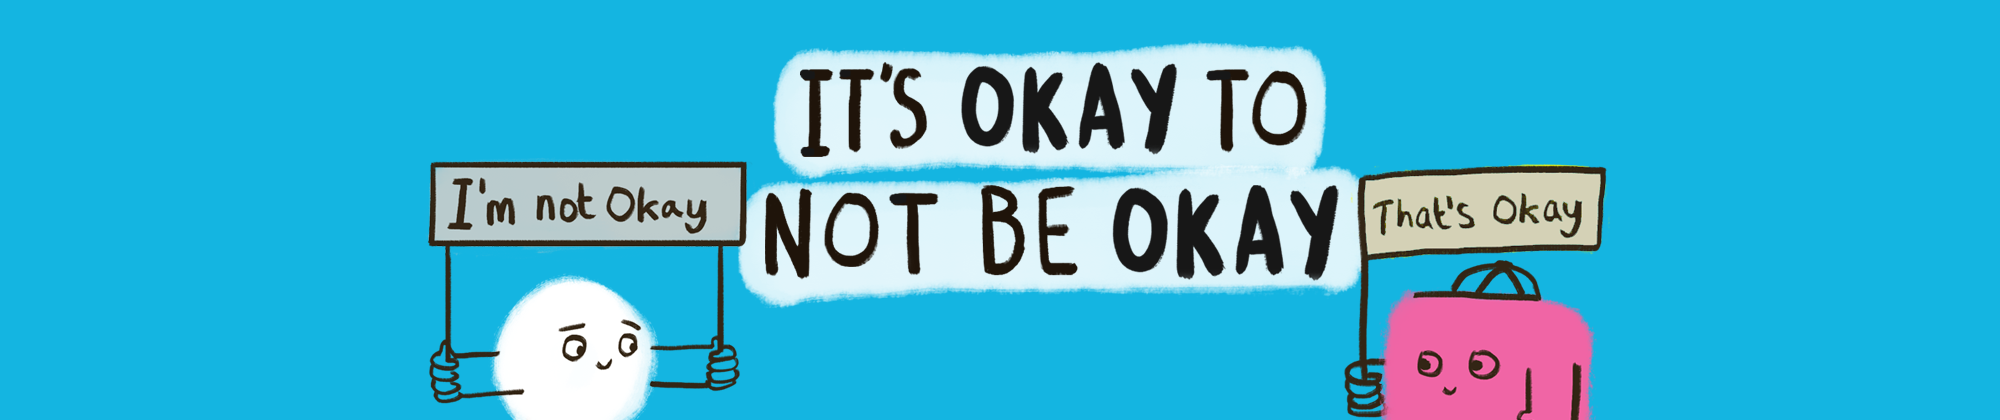 Graphic text - It's okay not to be okay